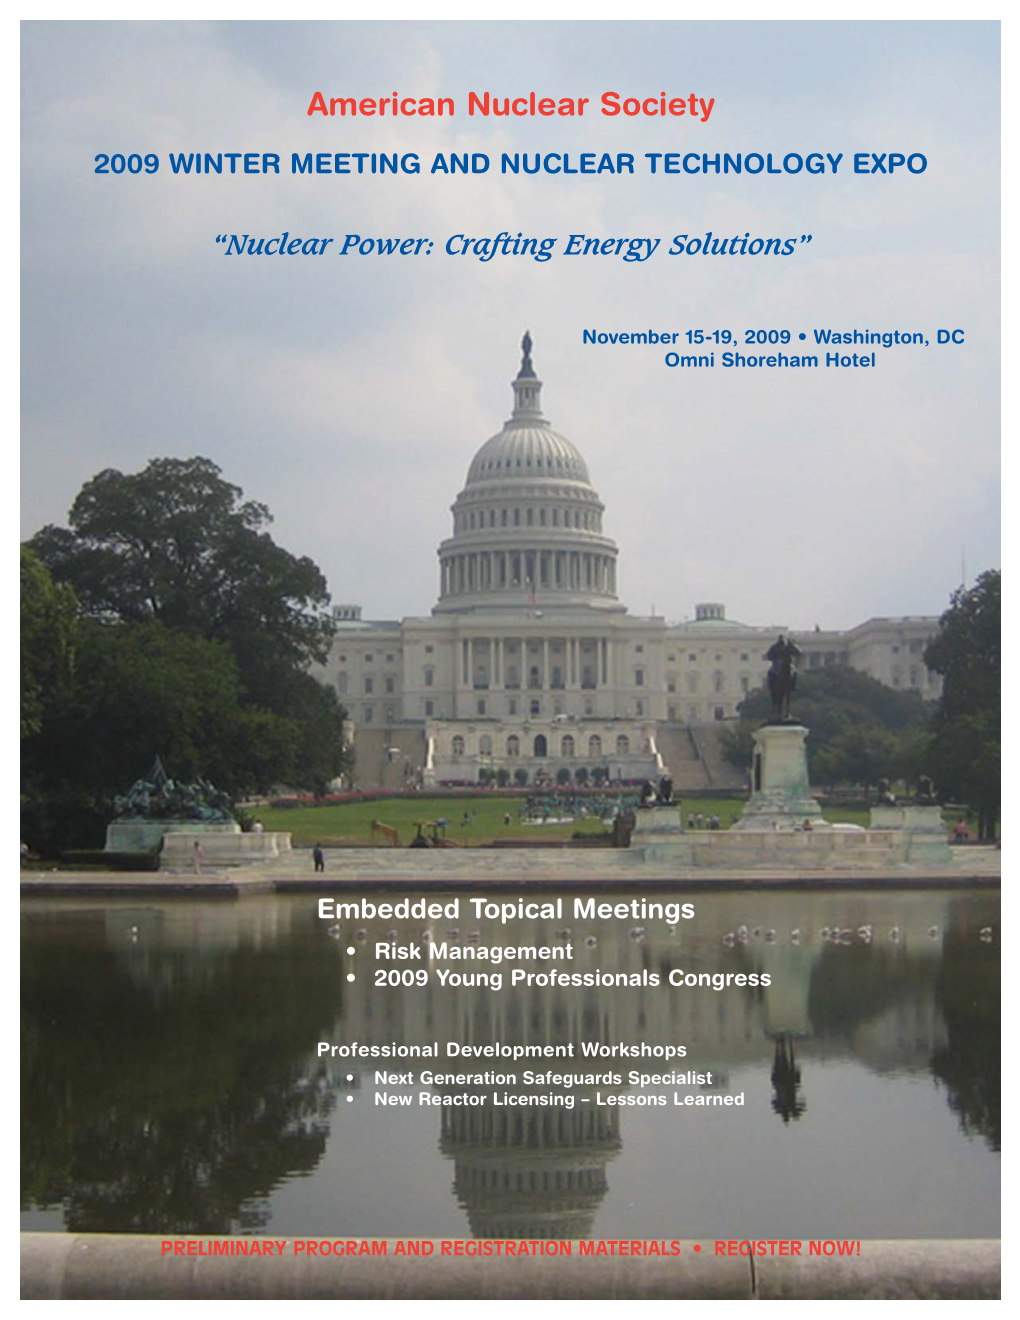 2009 Winter Meeting and Nuclear Technology Expo